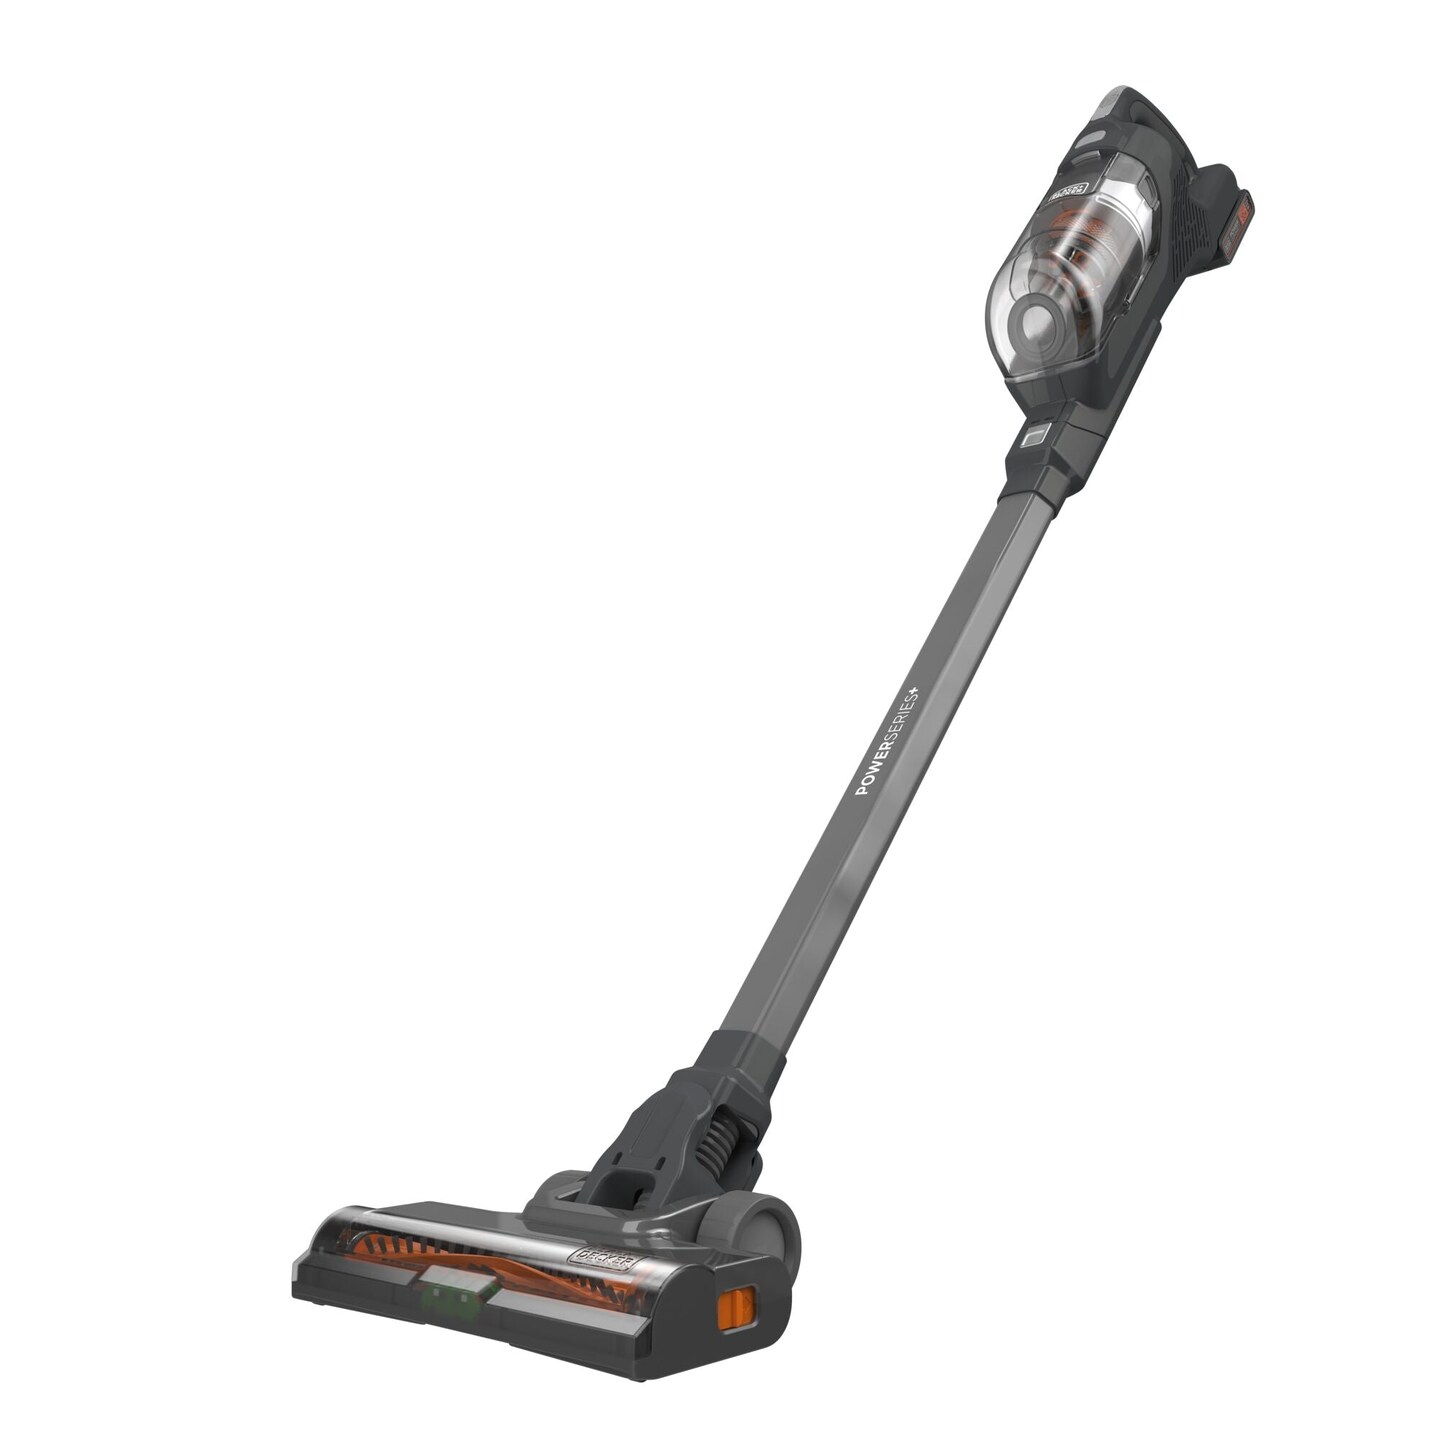  BLACK+DECKER 20V MAX* Cordless Sweeper with Power